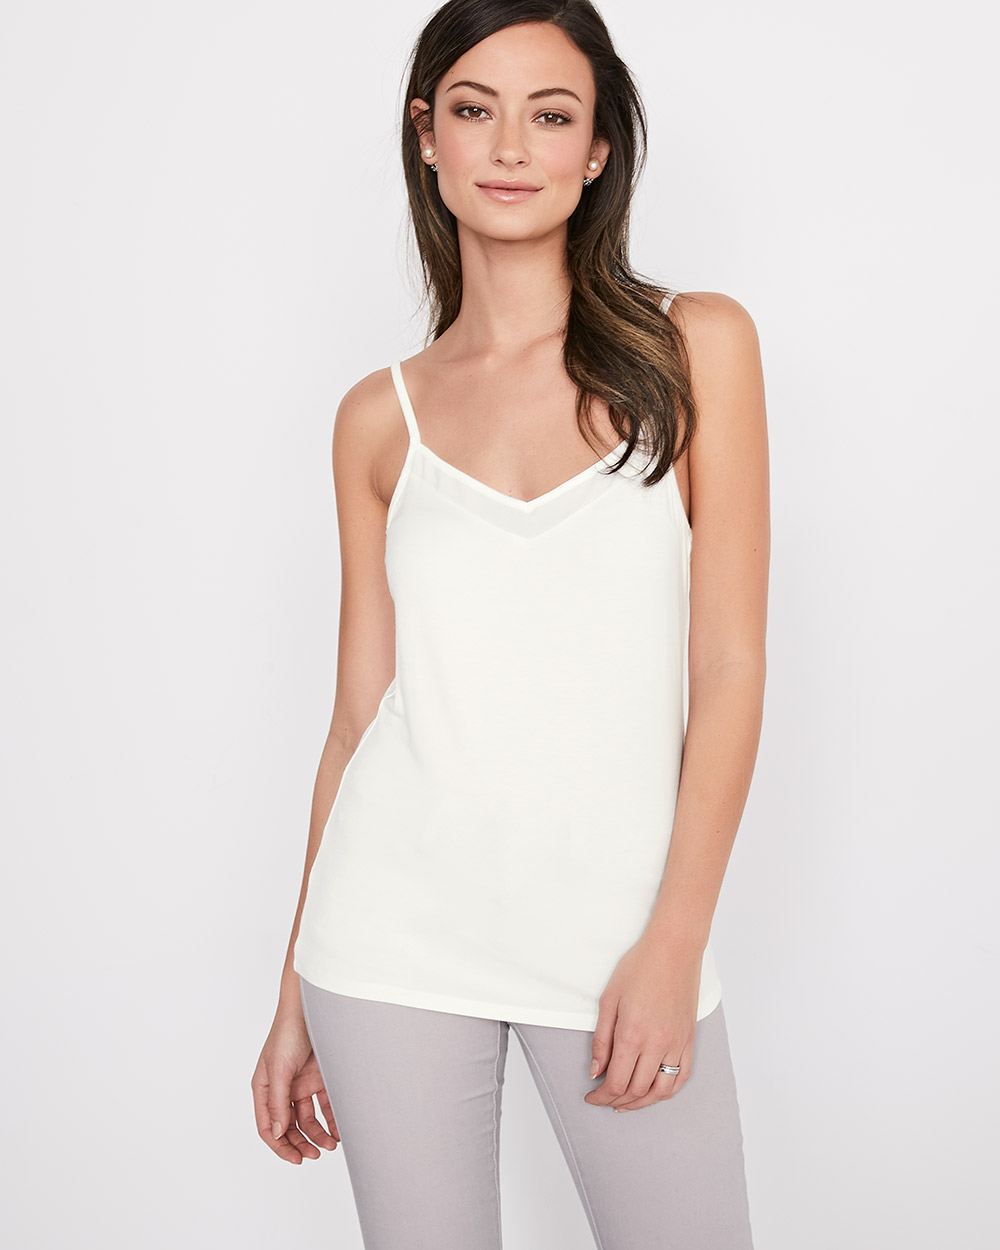 Cami with Adjustable Straps